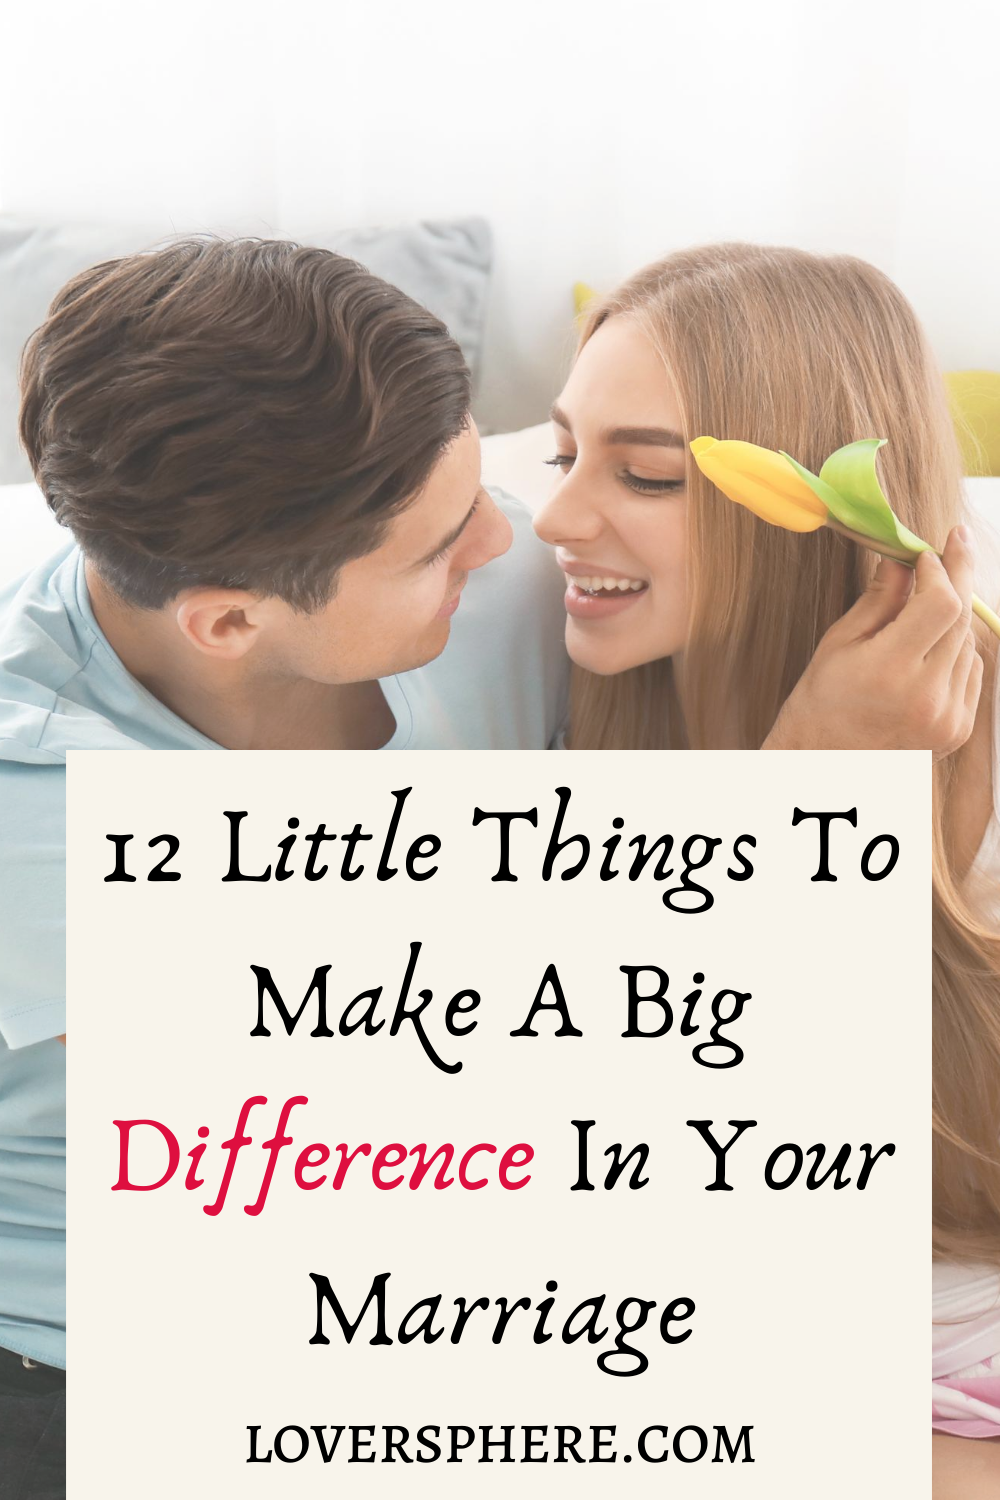 Little Things To Make A Big Difference In Your Marriage